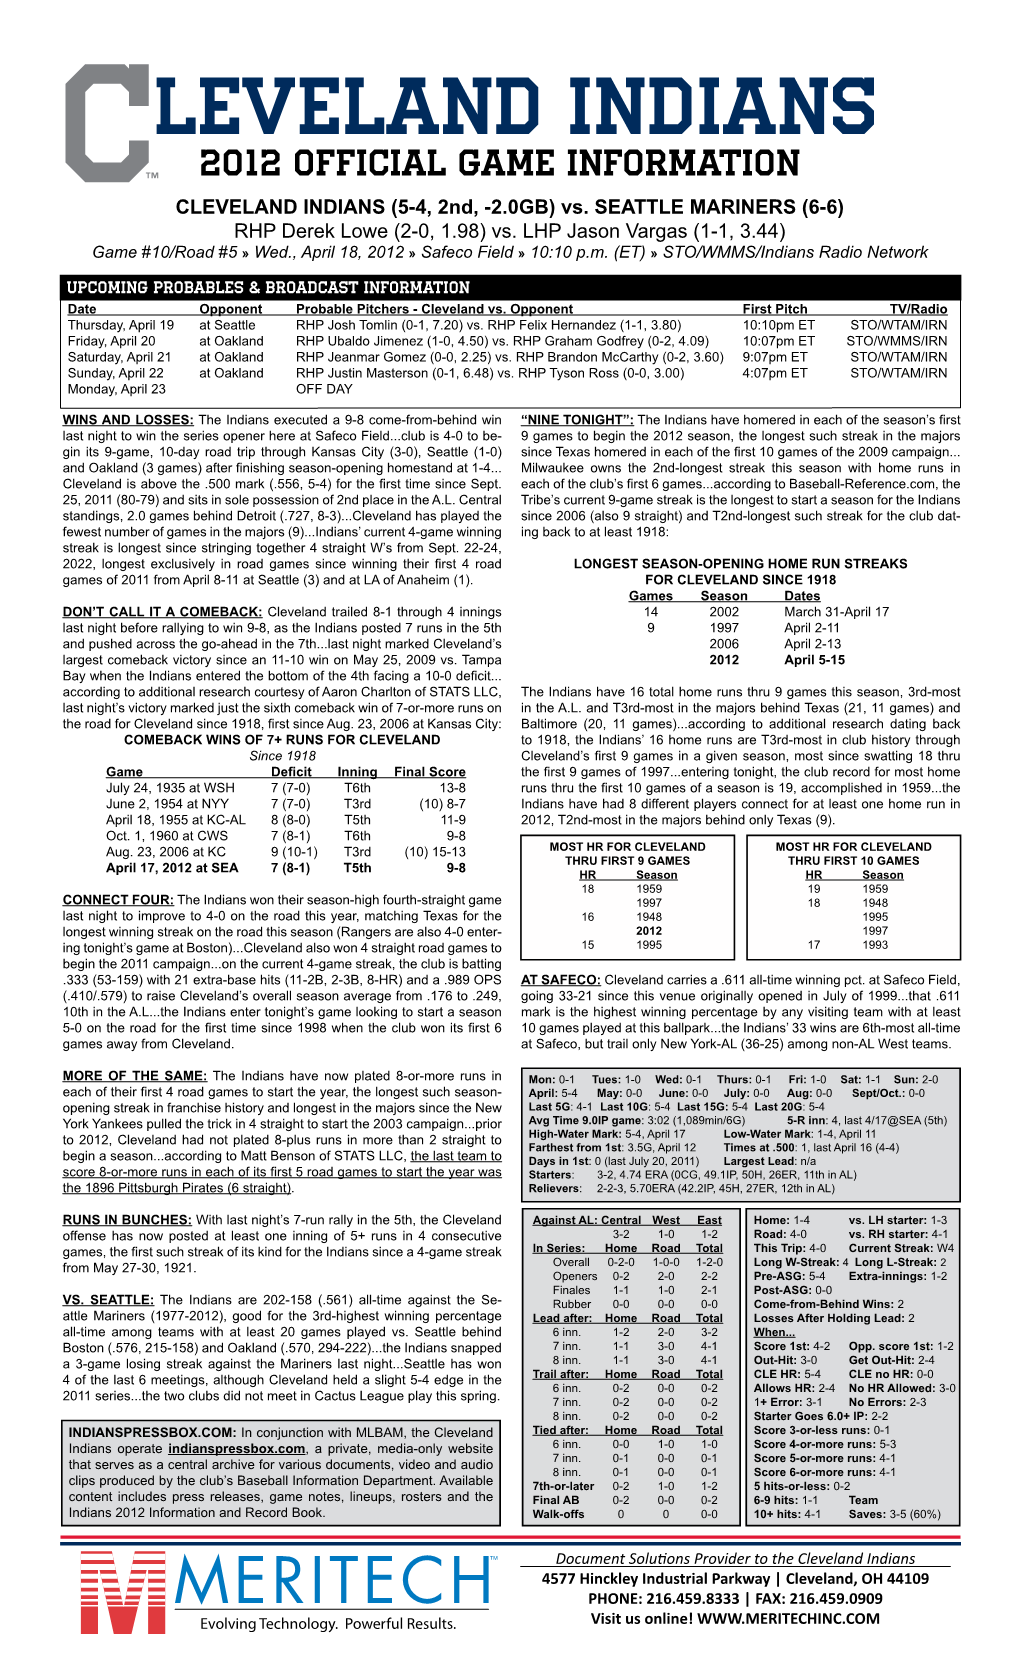 INDIANS GAME NOTES Wednesday, APRIL 18, 2012